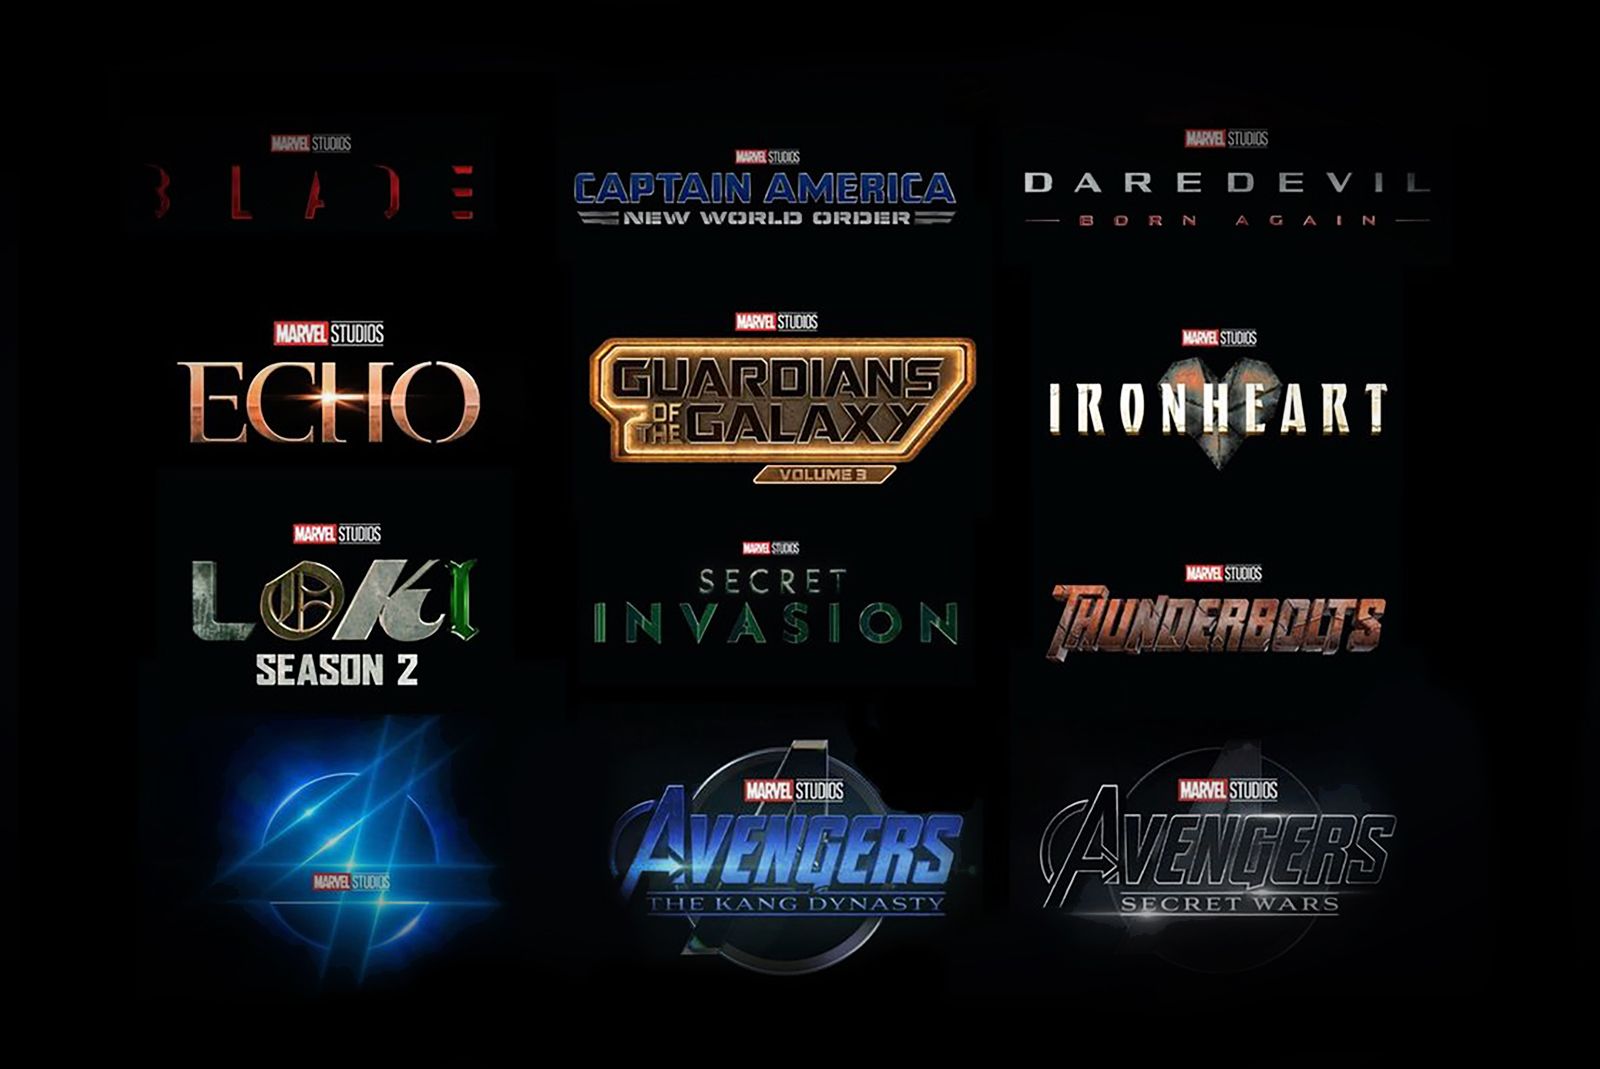 Marvel movies Release dates for every film & show